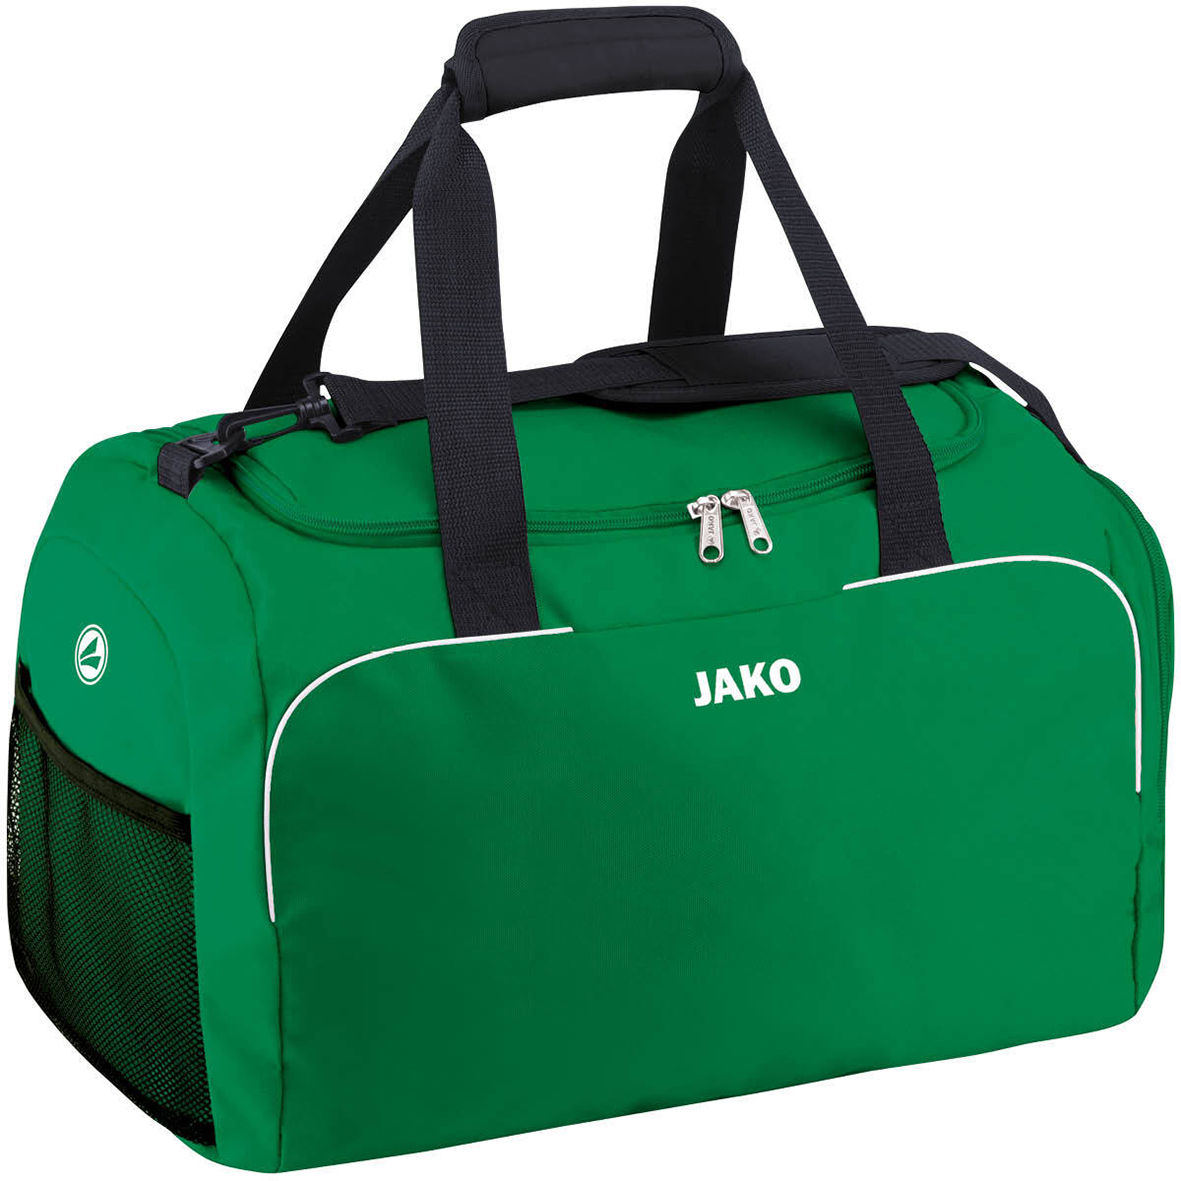 SPORTS BAG JAKO CLASSICO WITH SIDE WET COMPARTMENTS, GREEN